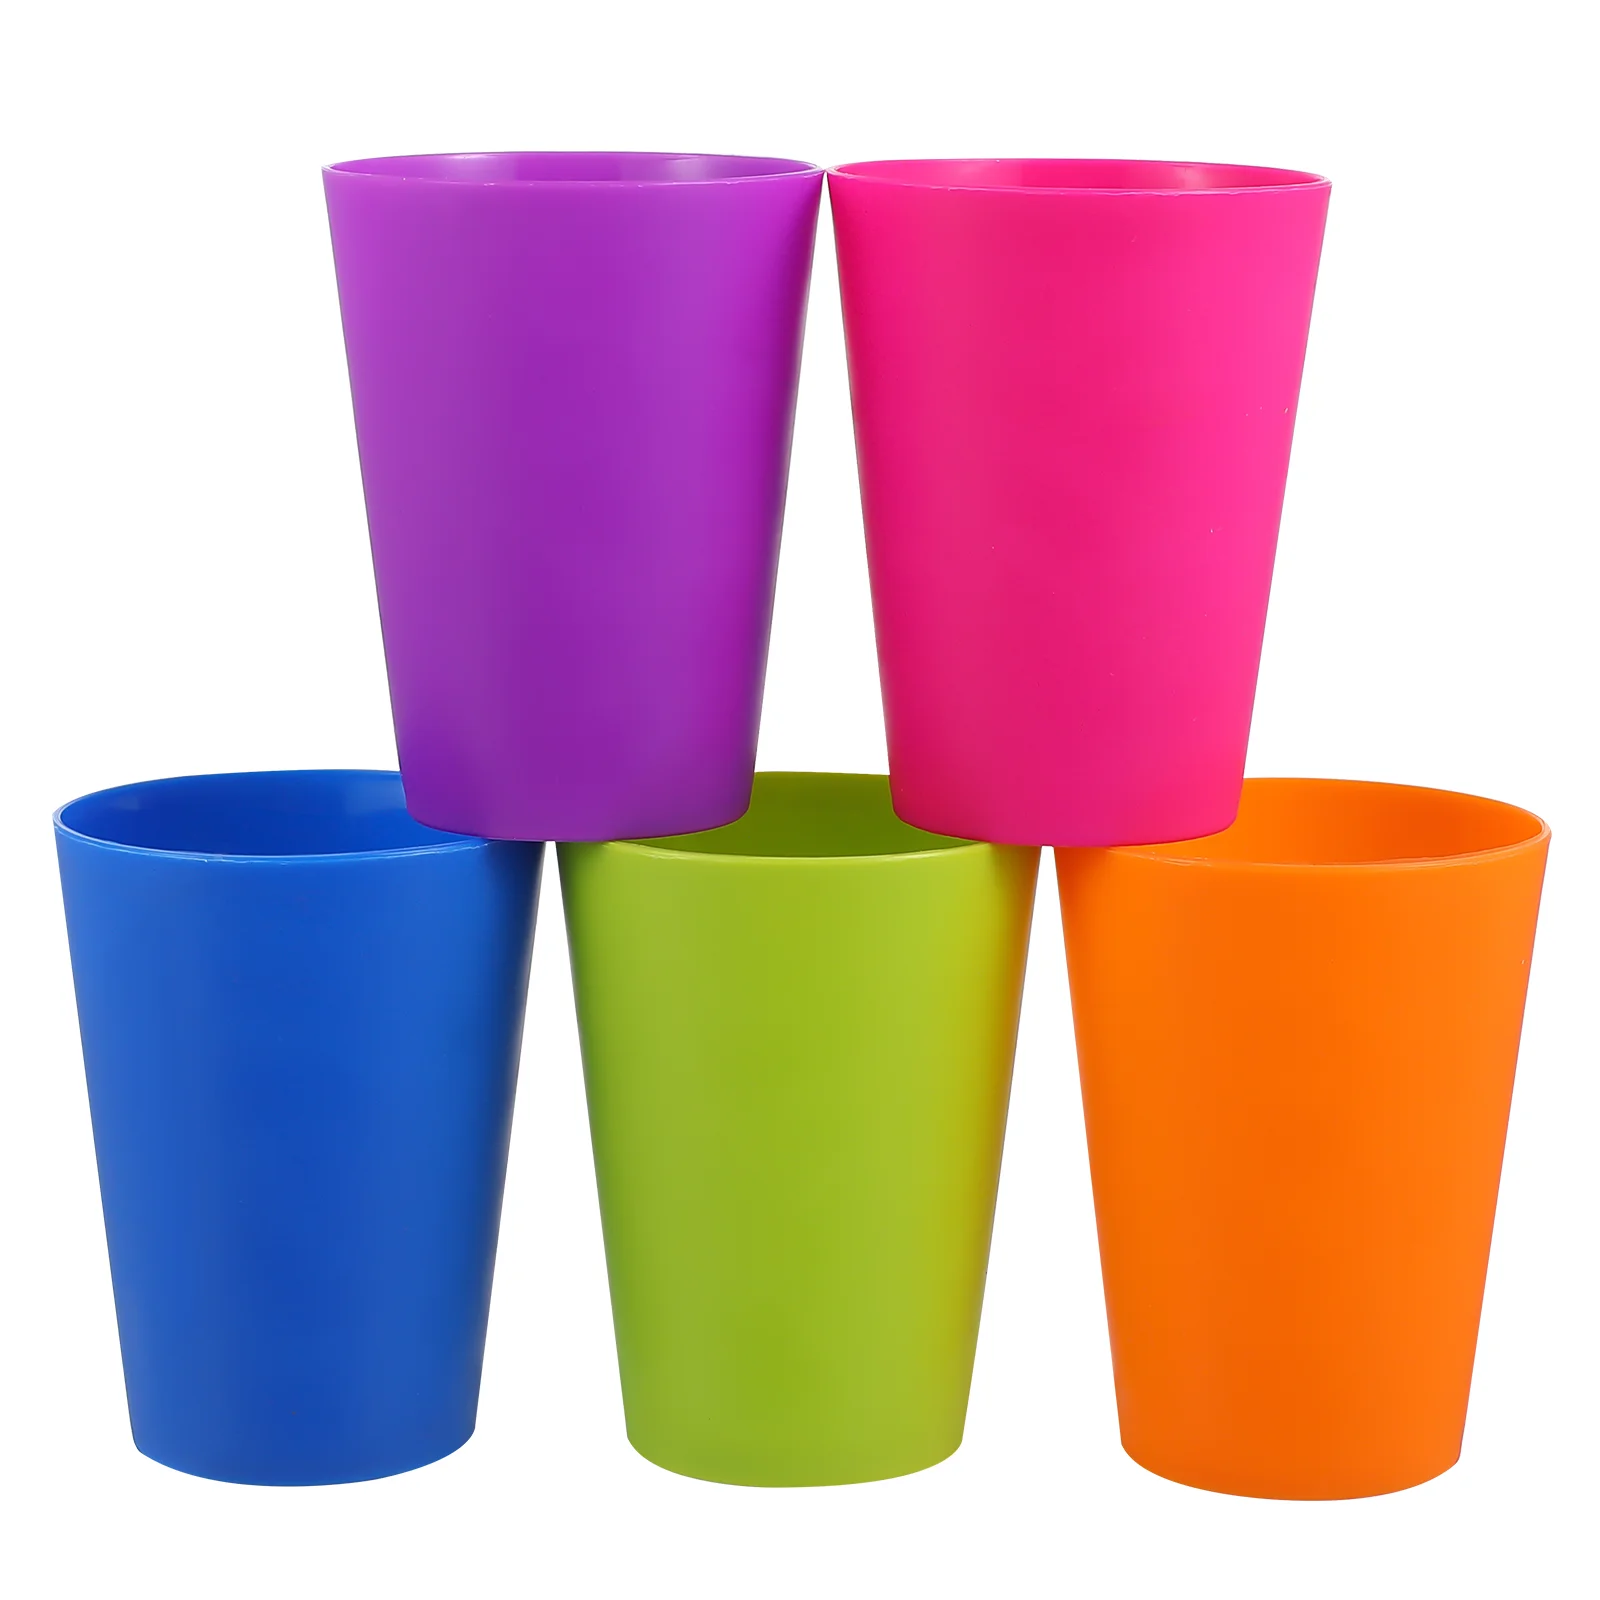 

Cups Plastic Drinking Kids Reusable Tumblers Cup Party Unbreakable Color Colored Children Beer Toddler Beverage Glasses Water